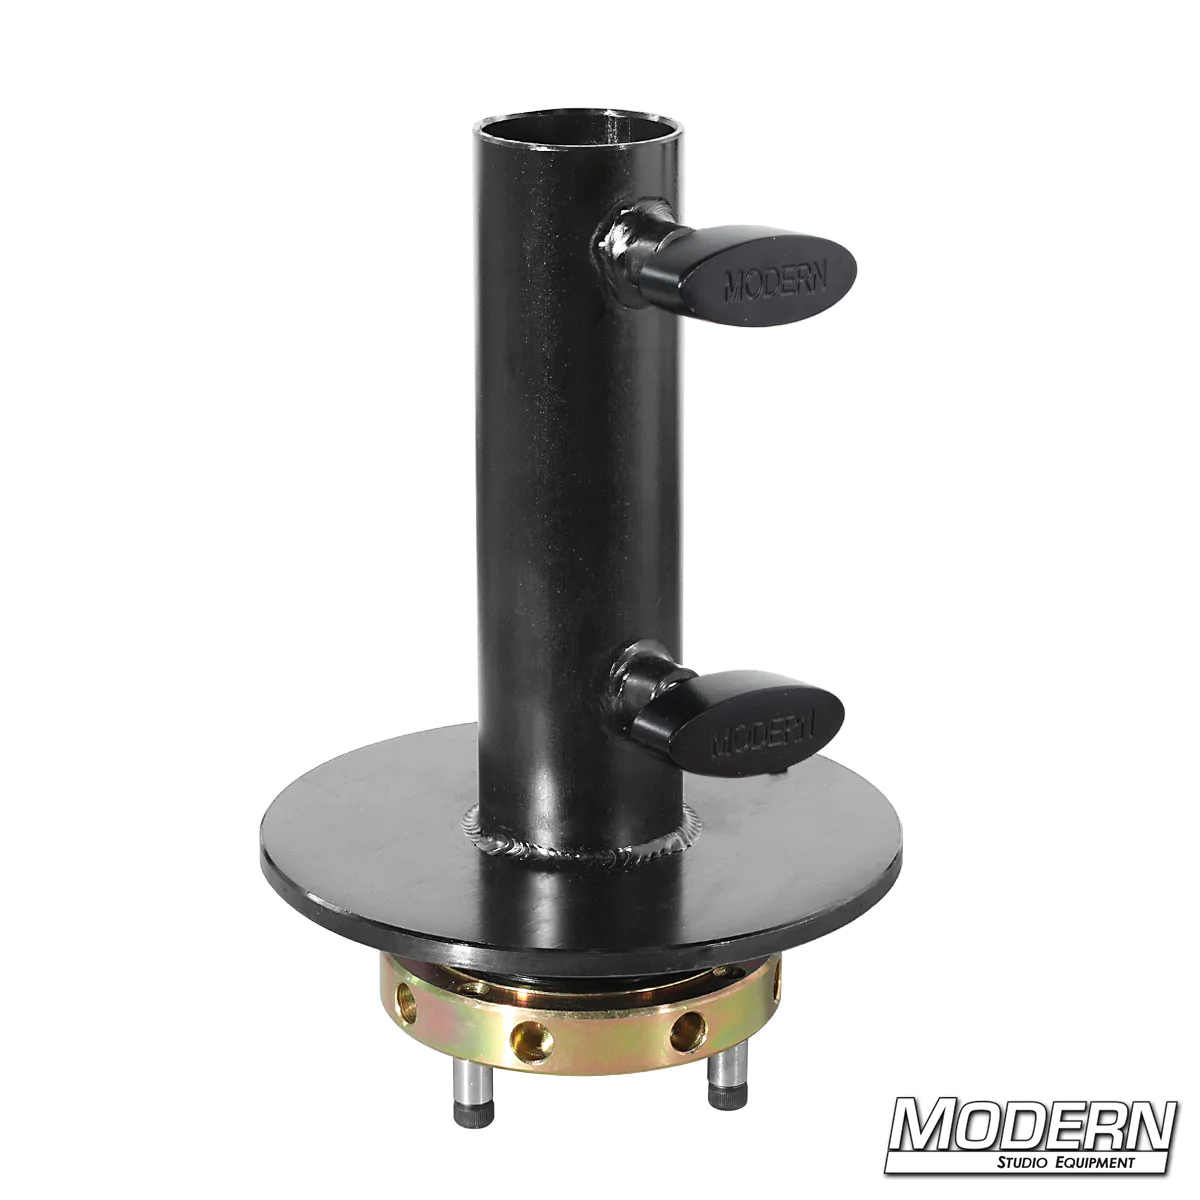 Mitchell to 1-1/4-inch Adapter - Black Zinc with T-Handles